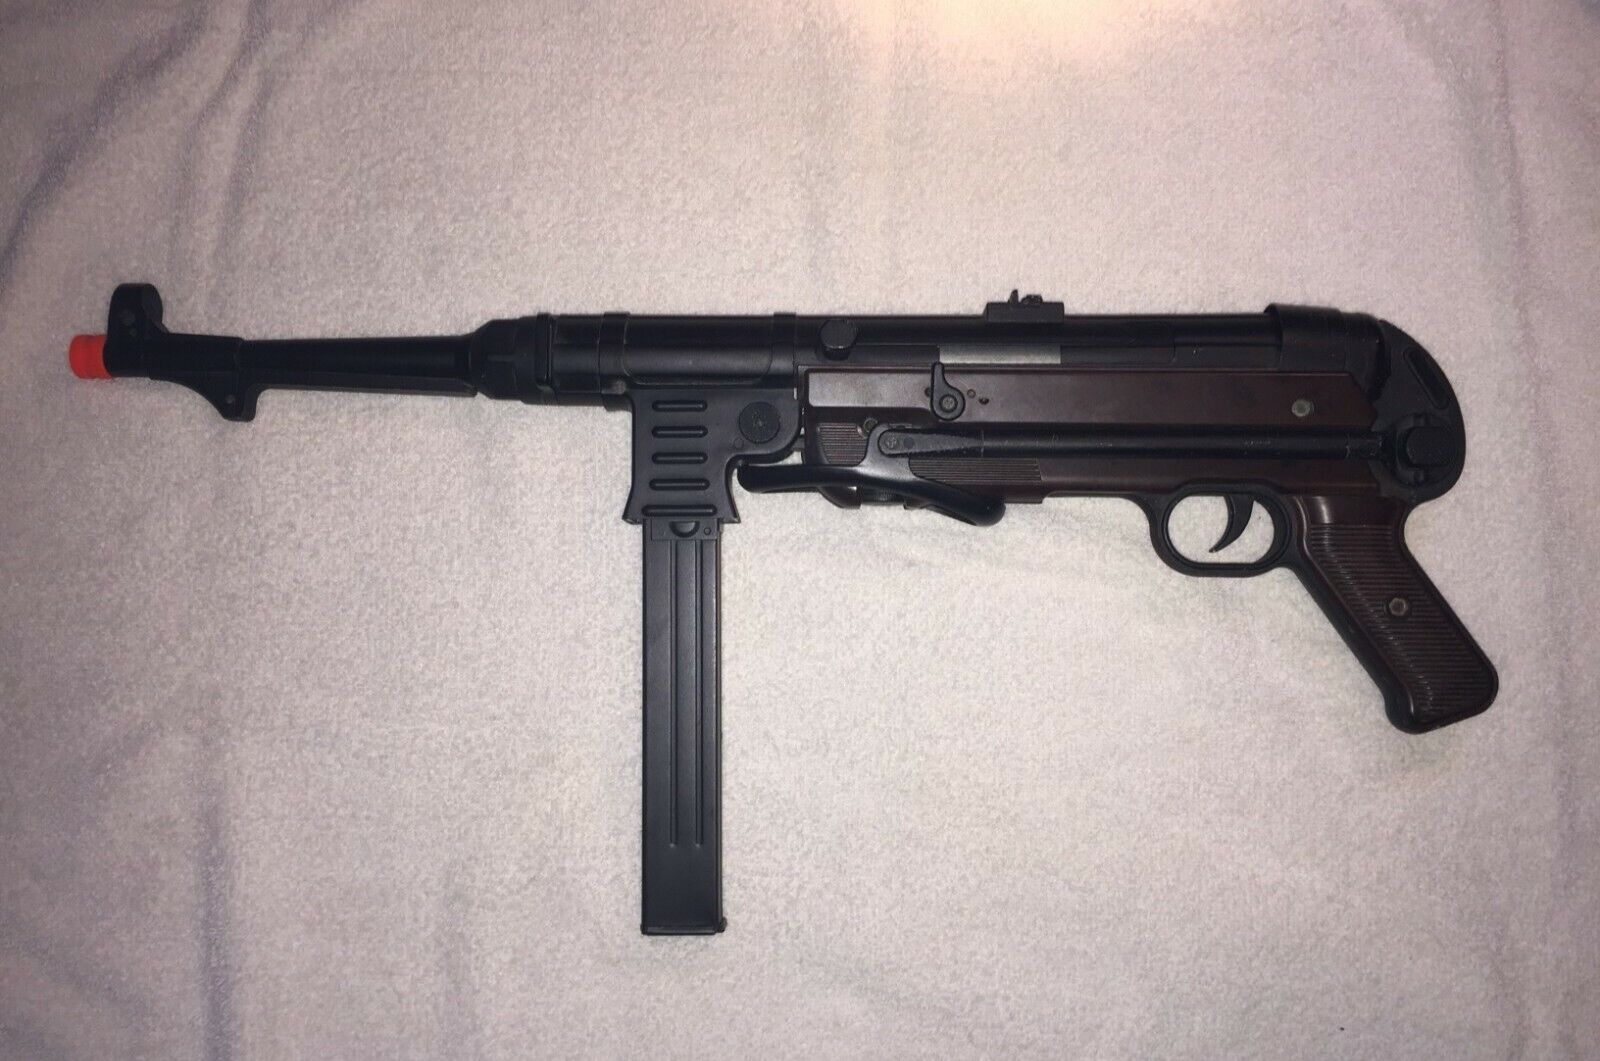 ELECTRIC AIRSOFT 2021 autumn and winter new MP40 AGM UNTESTED Fort Worth Mall METAL LIKELY WORKING REAL